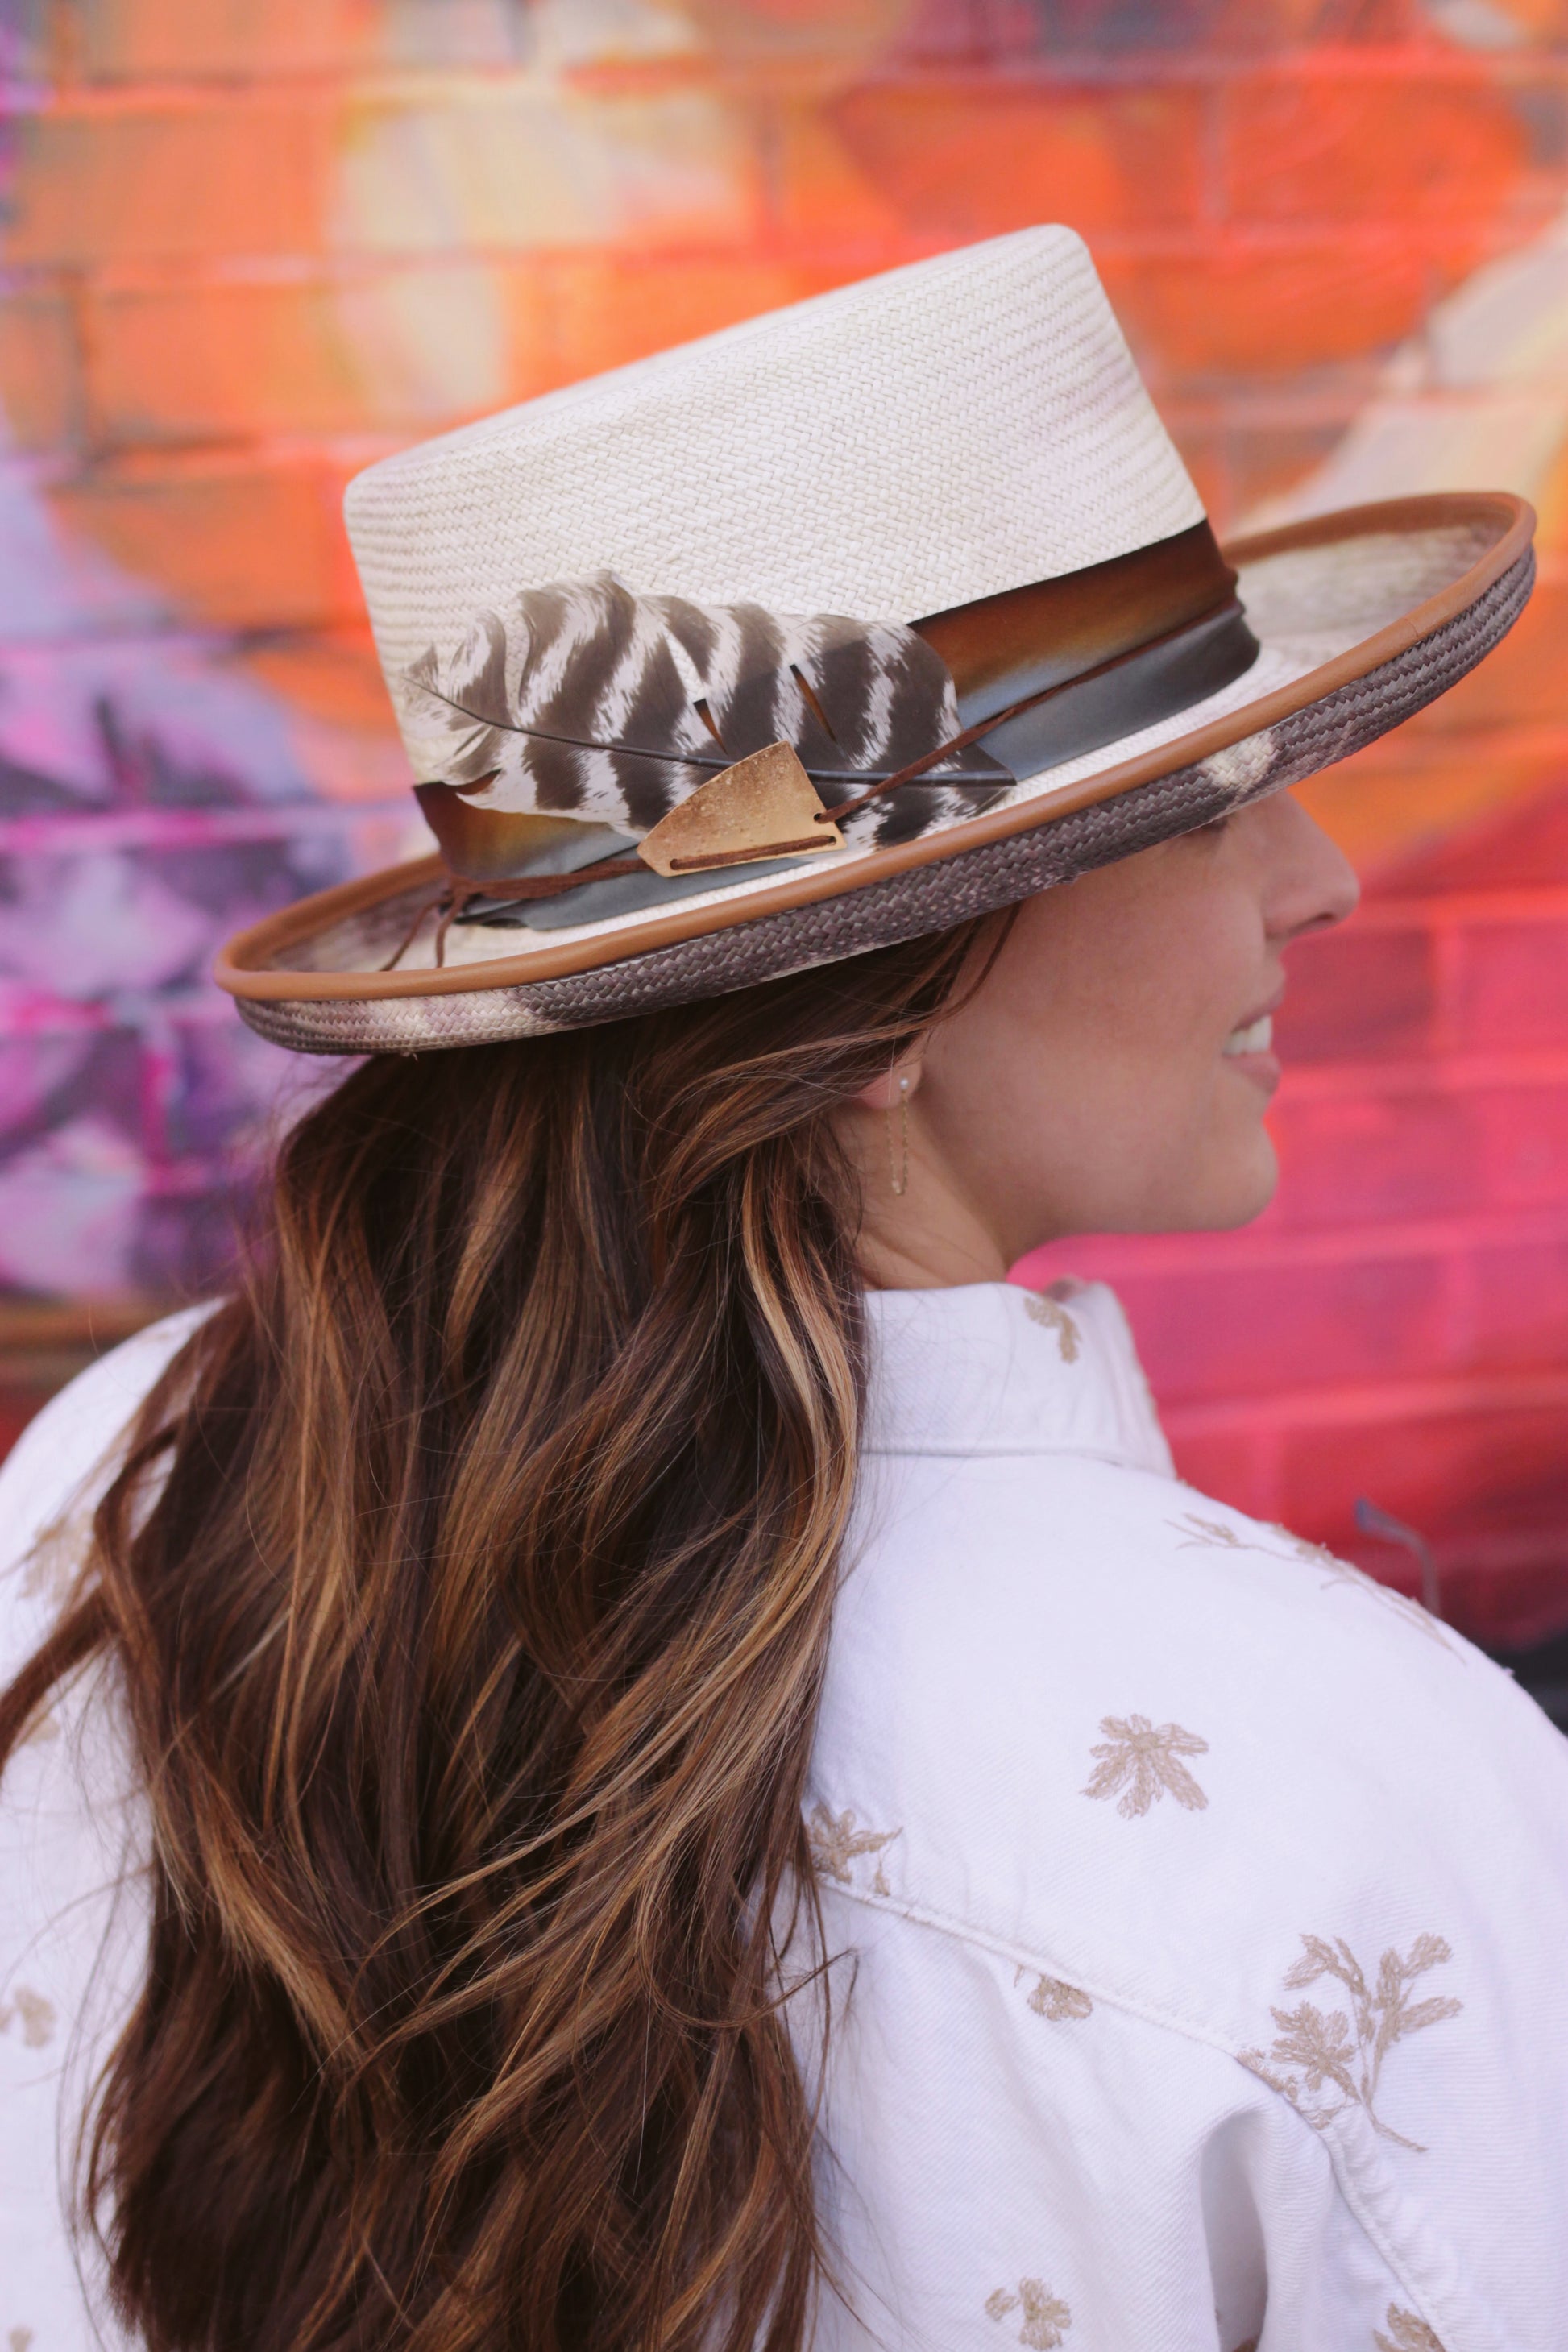 Cha Cha, a panama straw Gambler hat from Cha Cha's House of Ill Repute